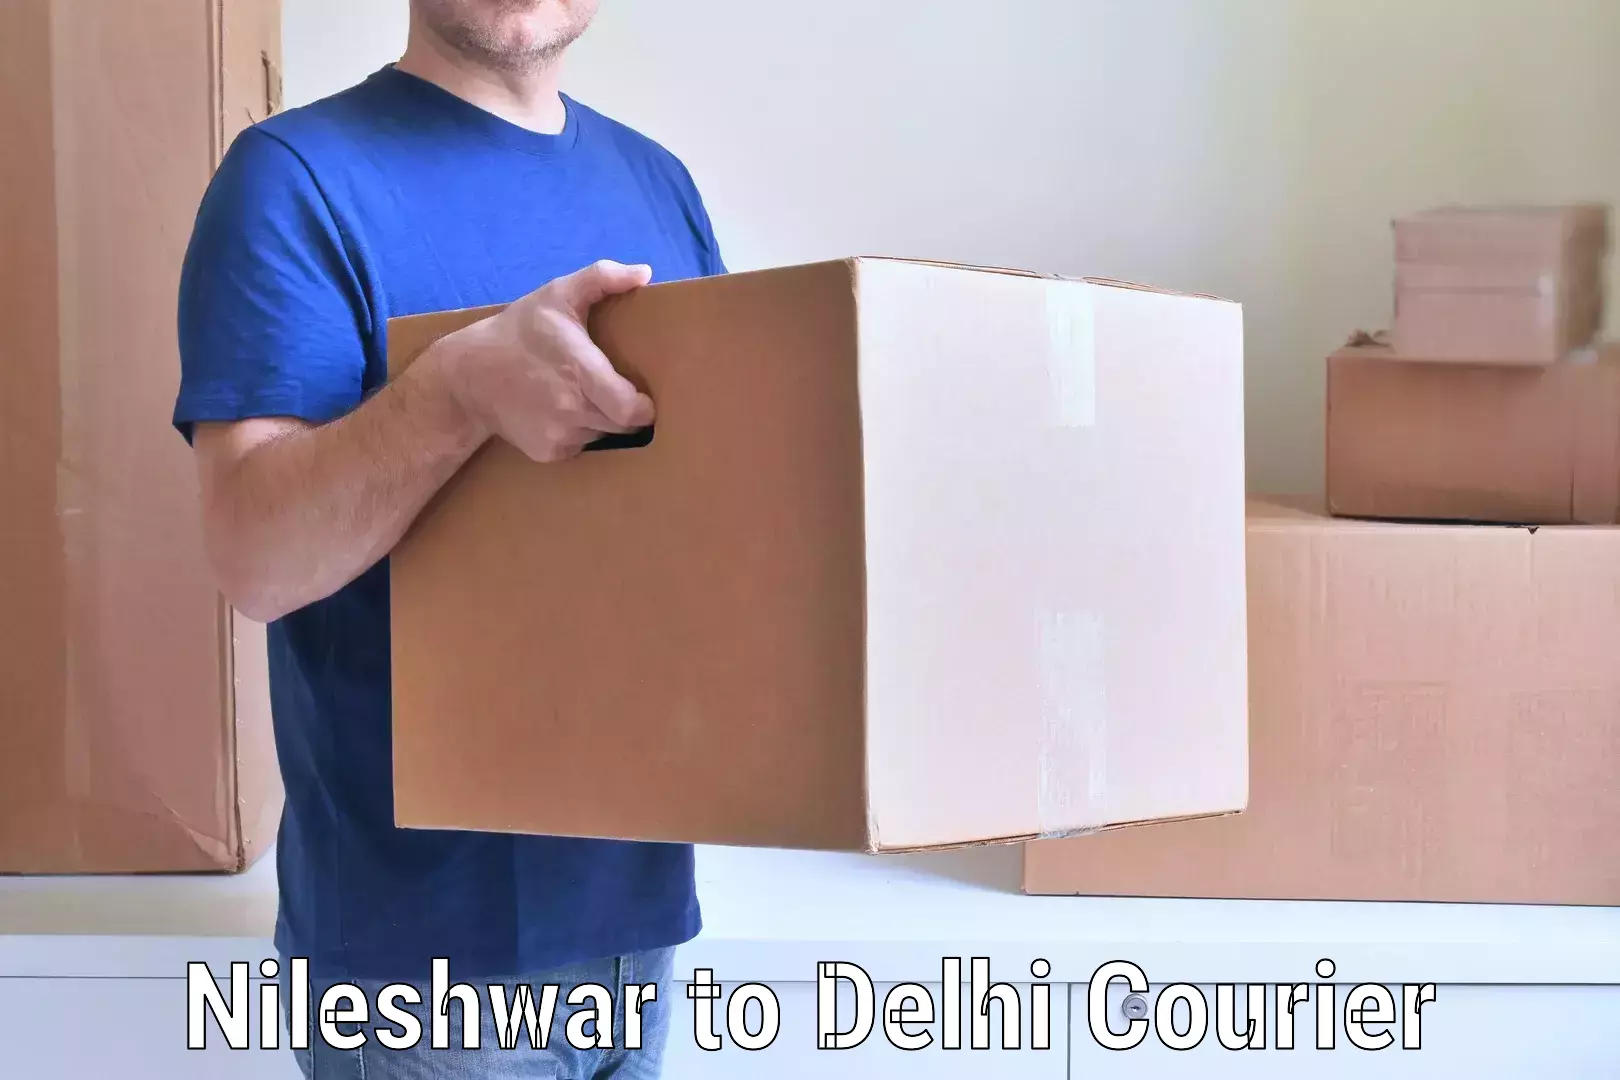 Trusted furniture transport in Nileshwar to NCR